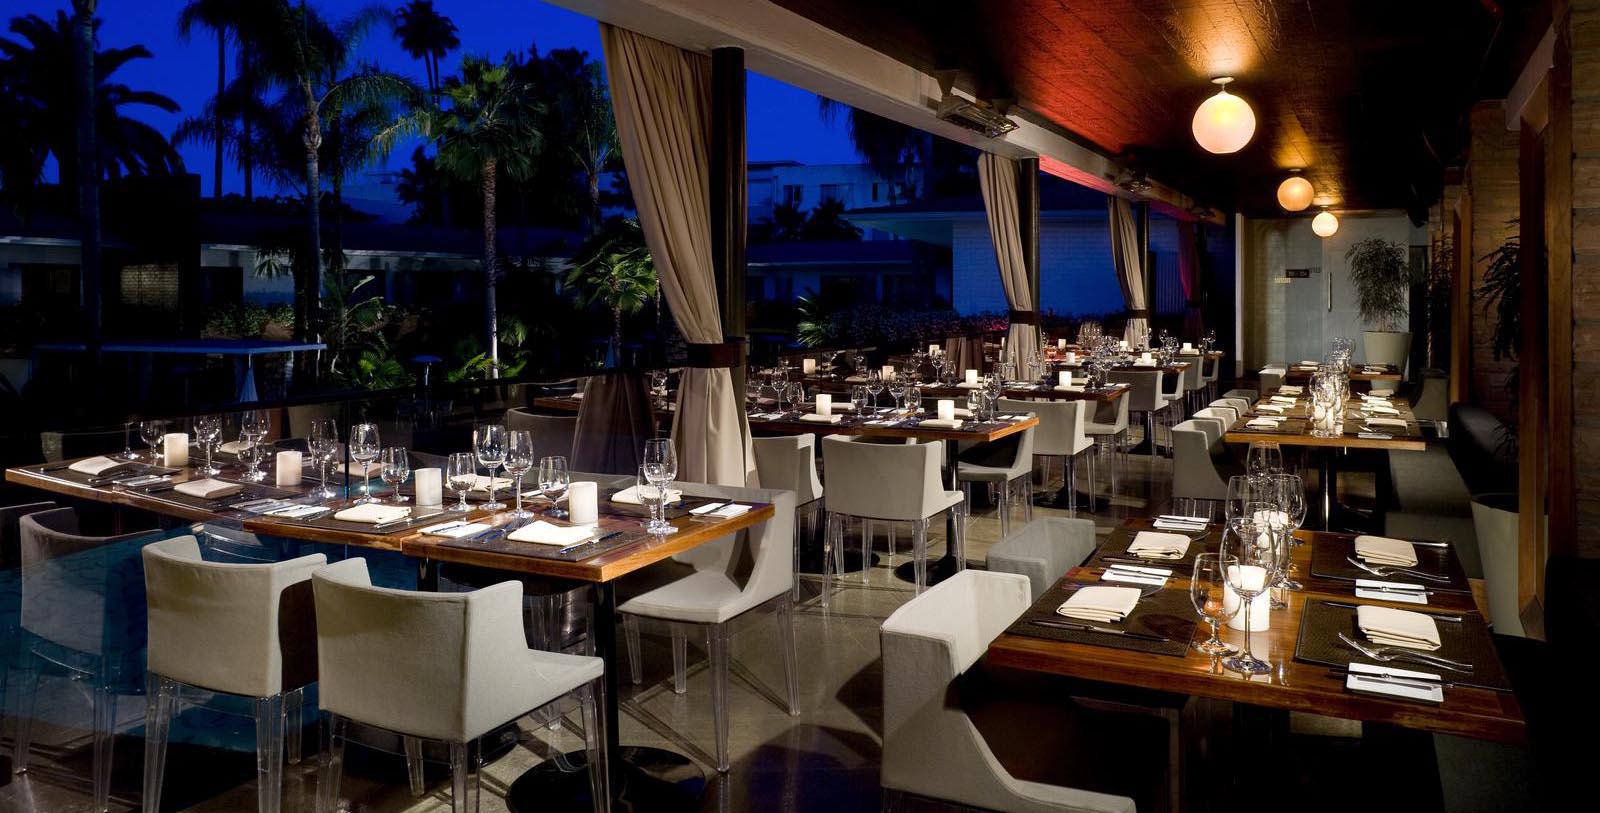 Taste some authentic Los Angeles-style cuisine at the Public Kitchen and Bar.